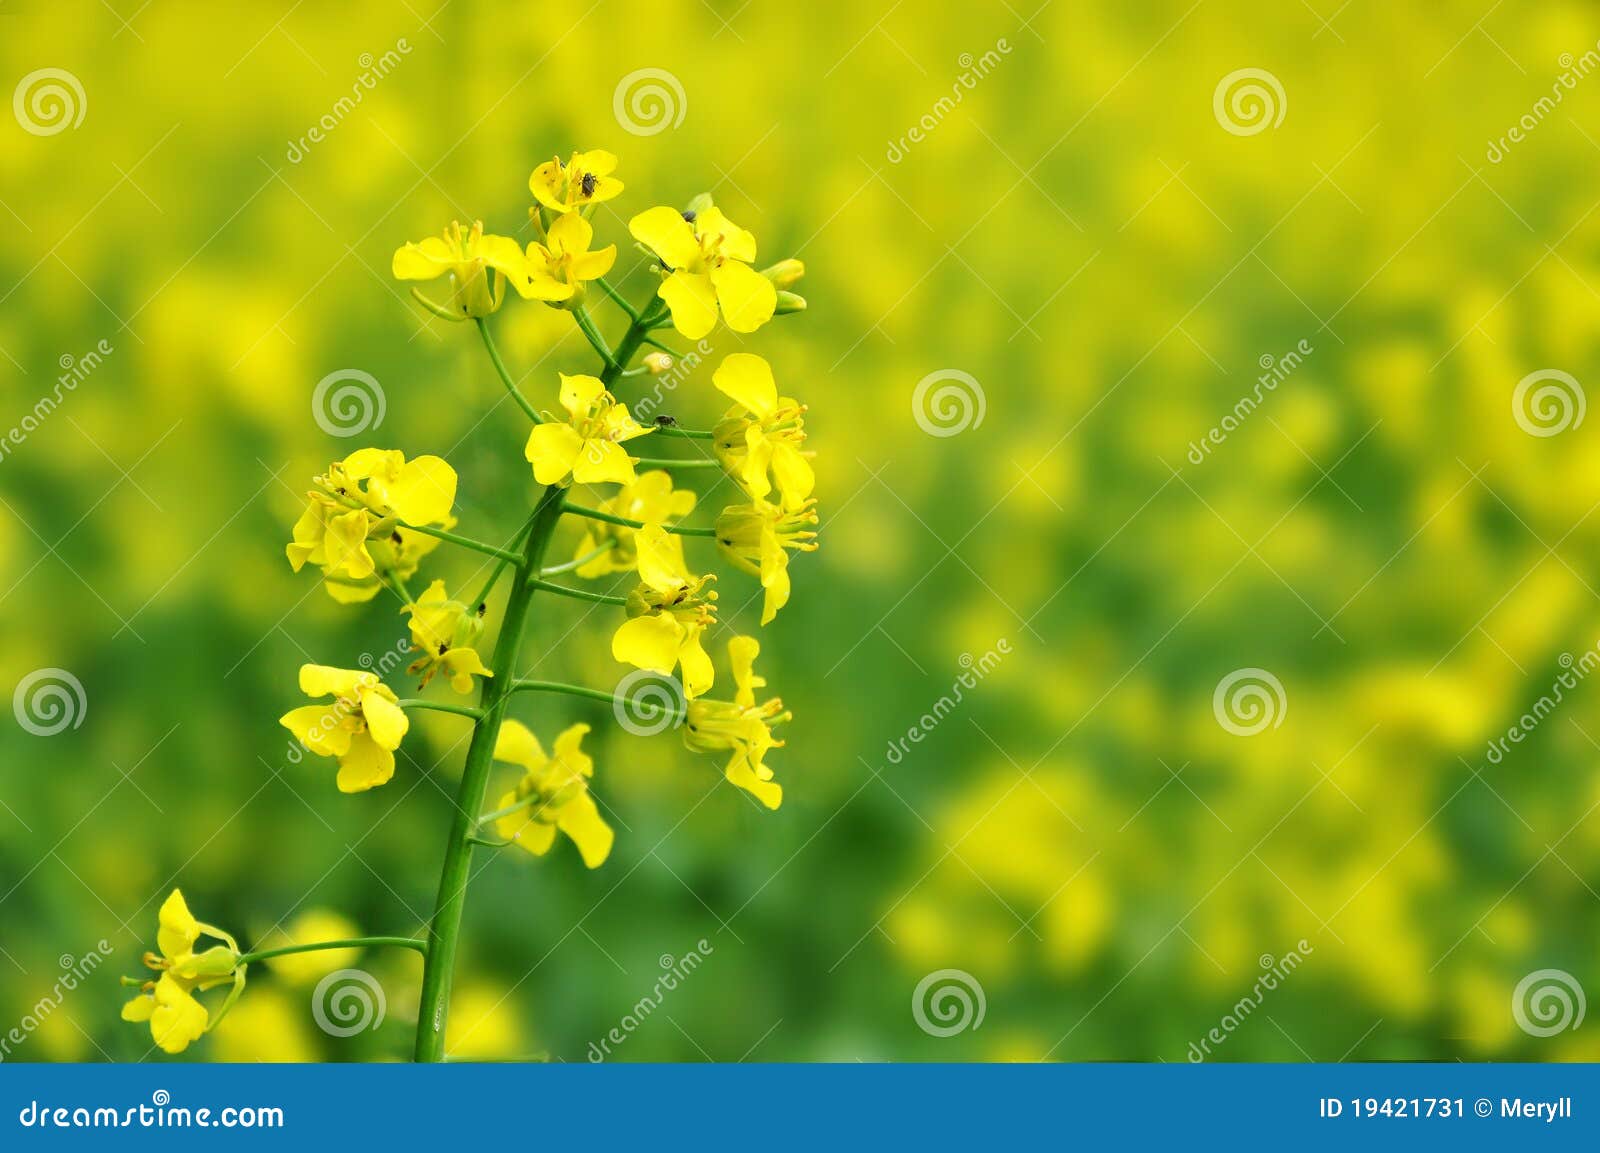 or canola flower, agricultural crop, closeup background.